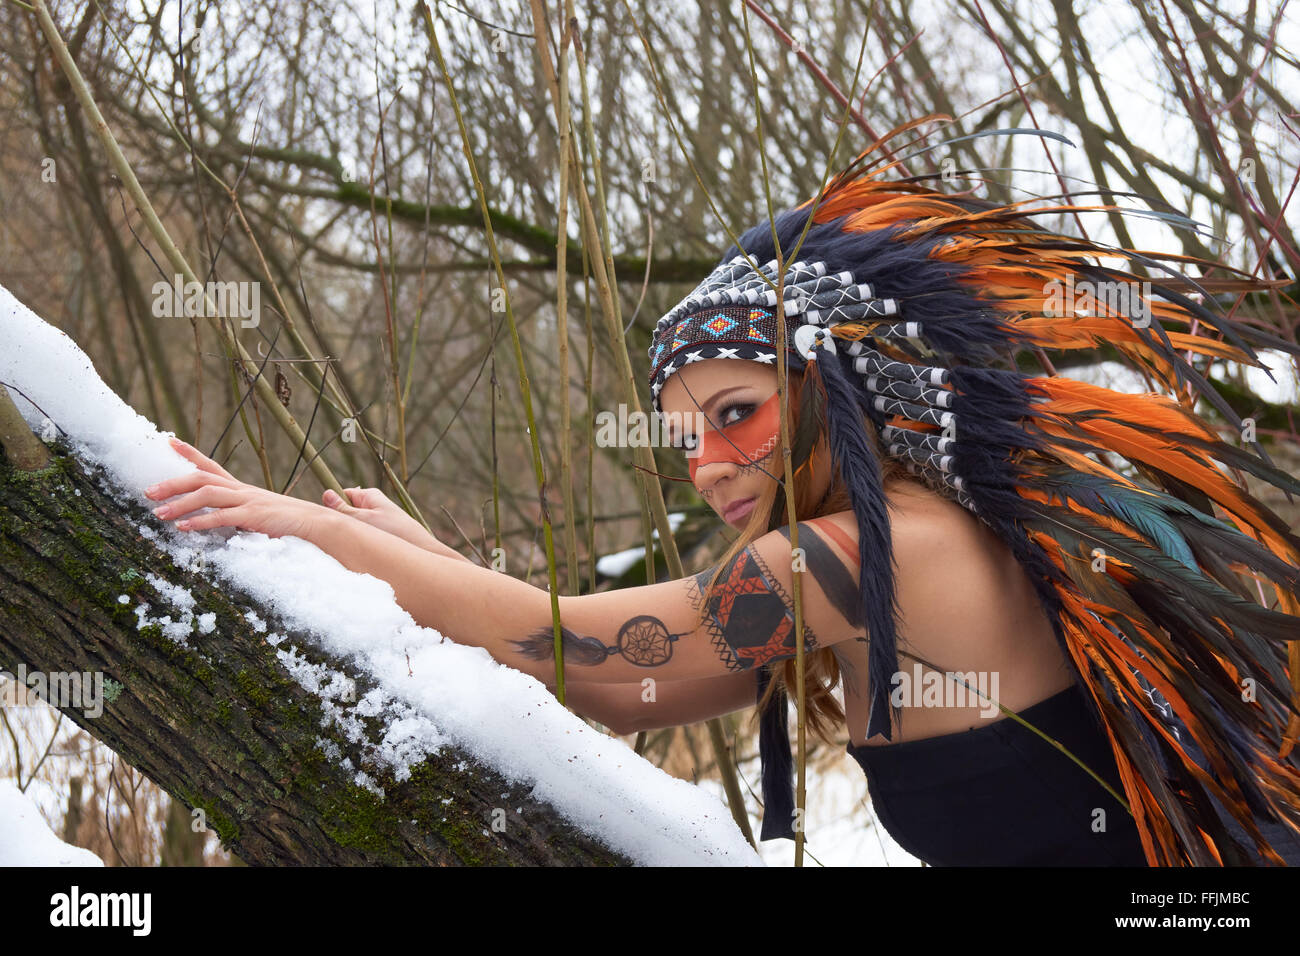 Girl in native american coiffure monte tree Banque D'Images